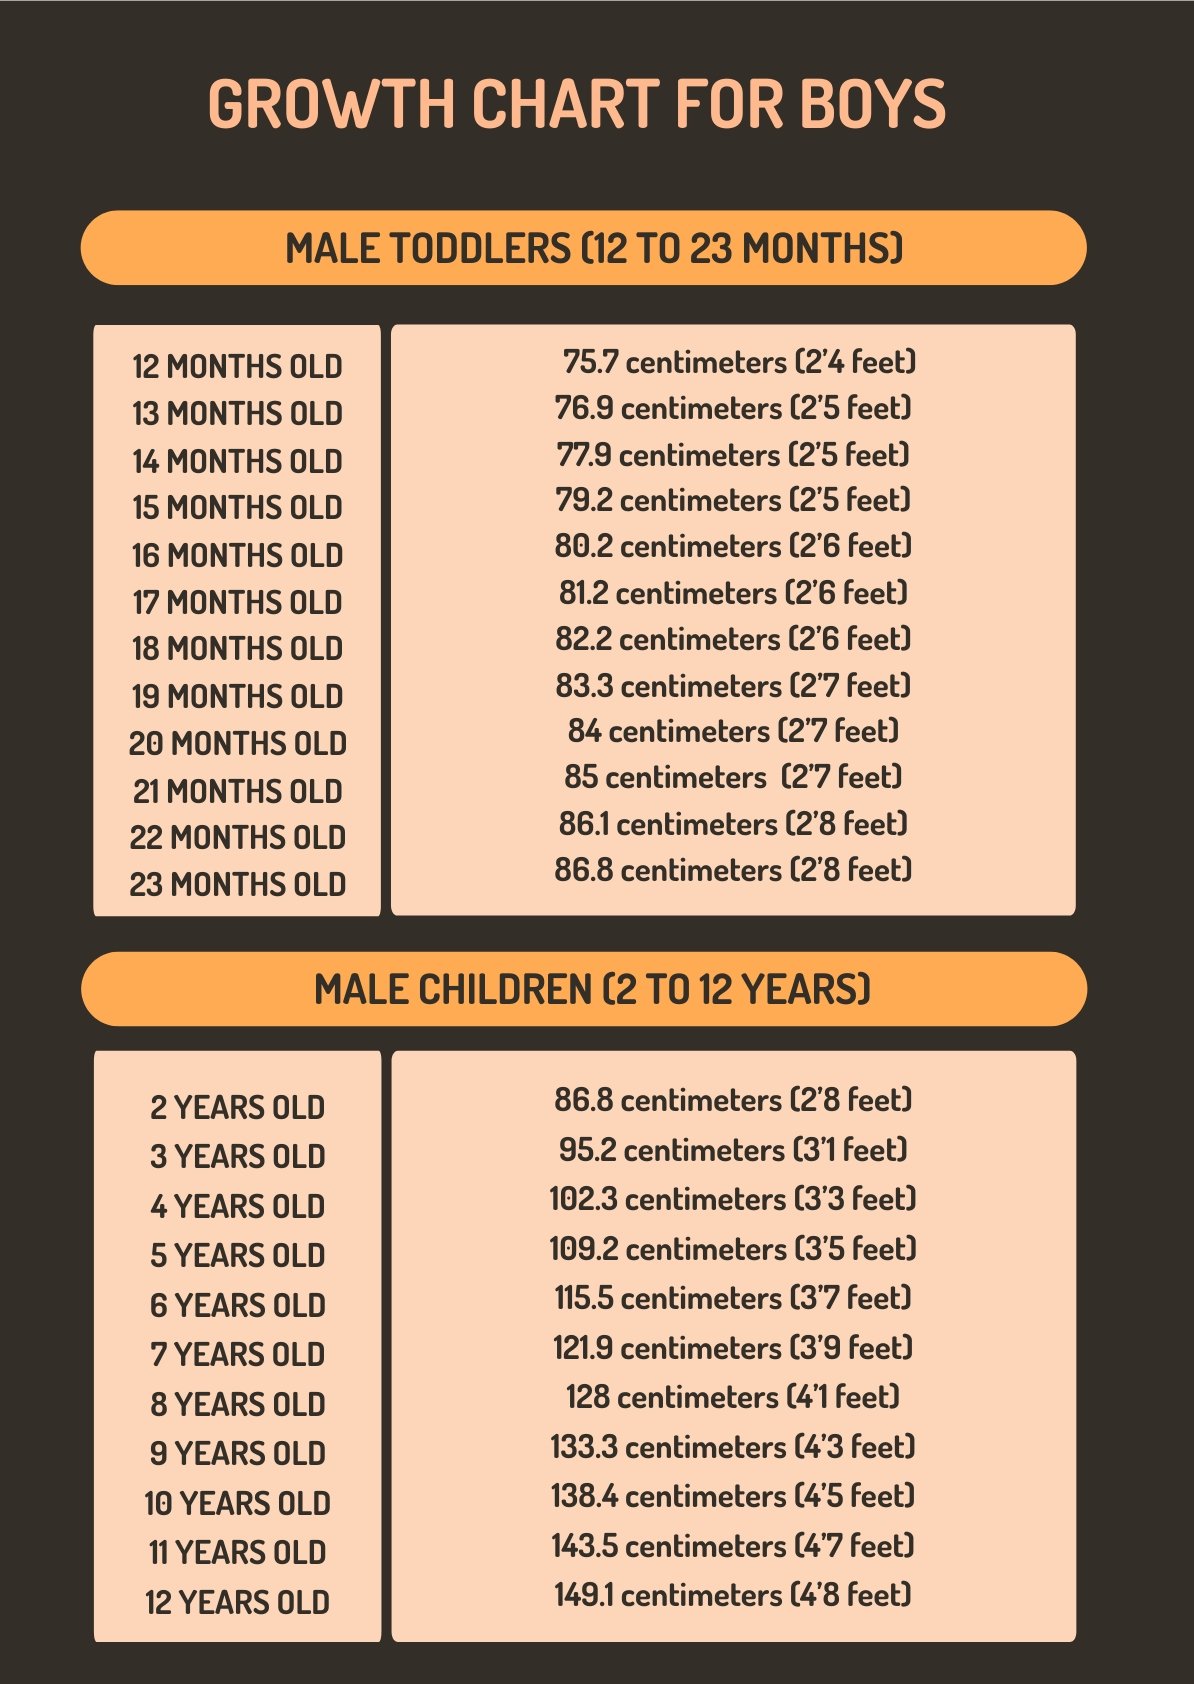 Growth Chart For Boys in PDF, Illustrator